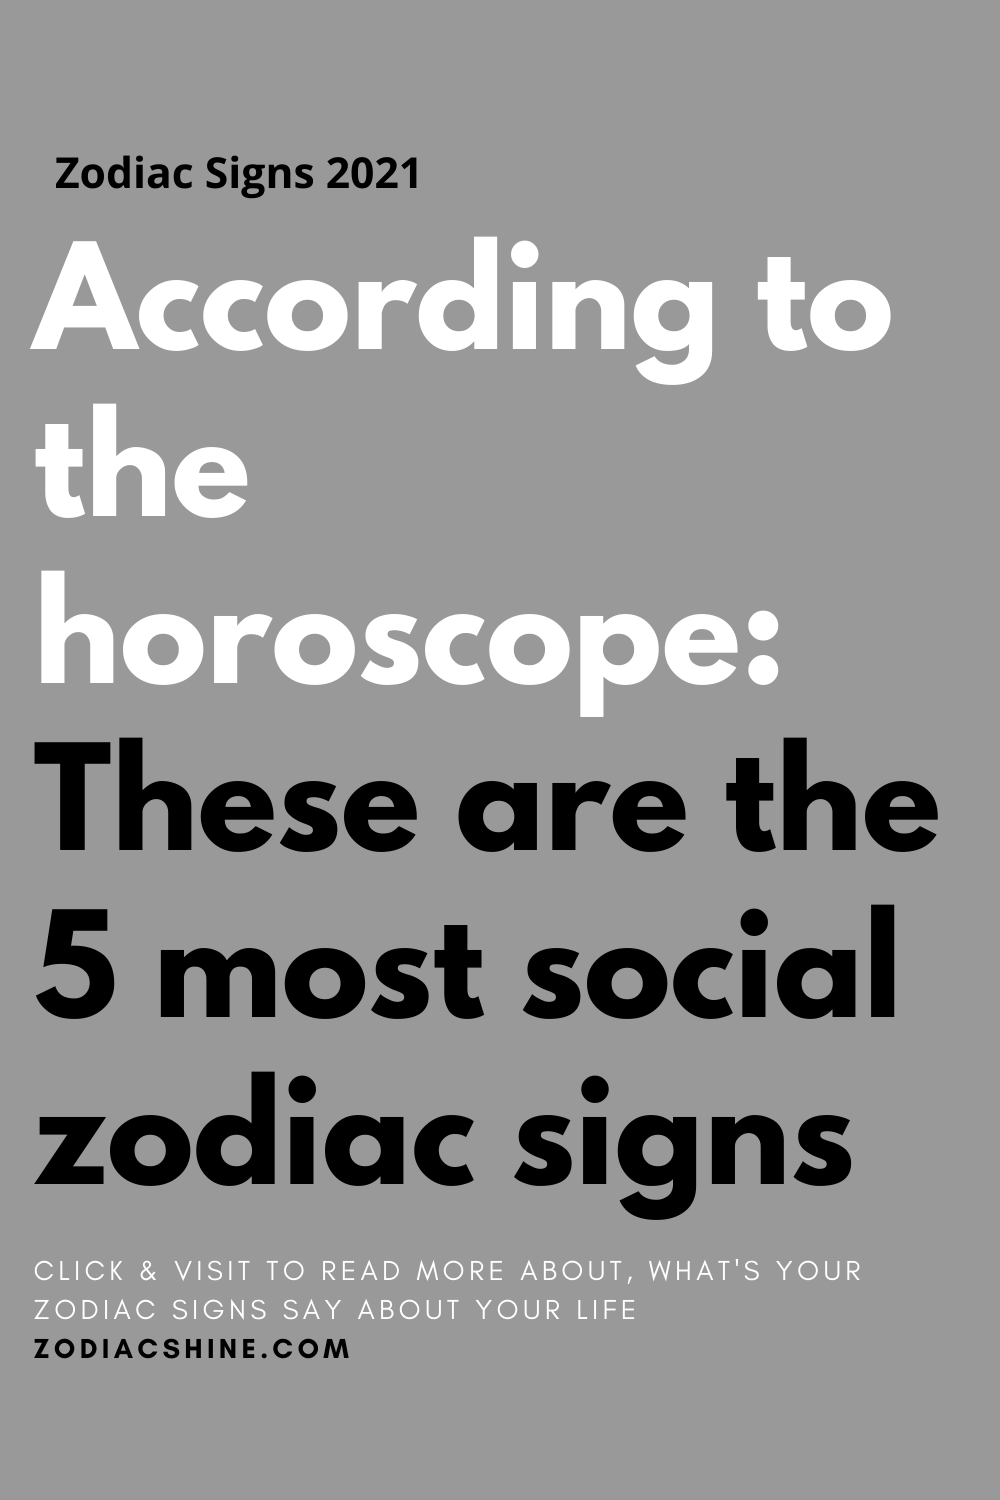 According to the horoscope: These are the 5 most social zodiac signs